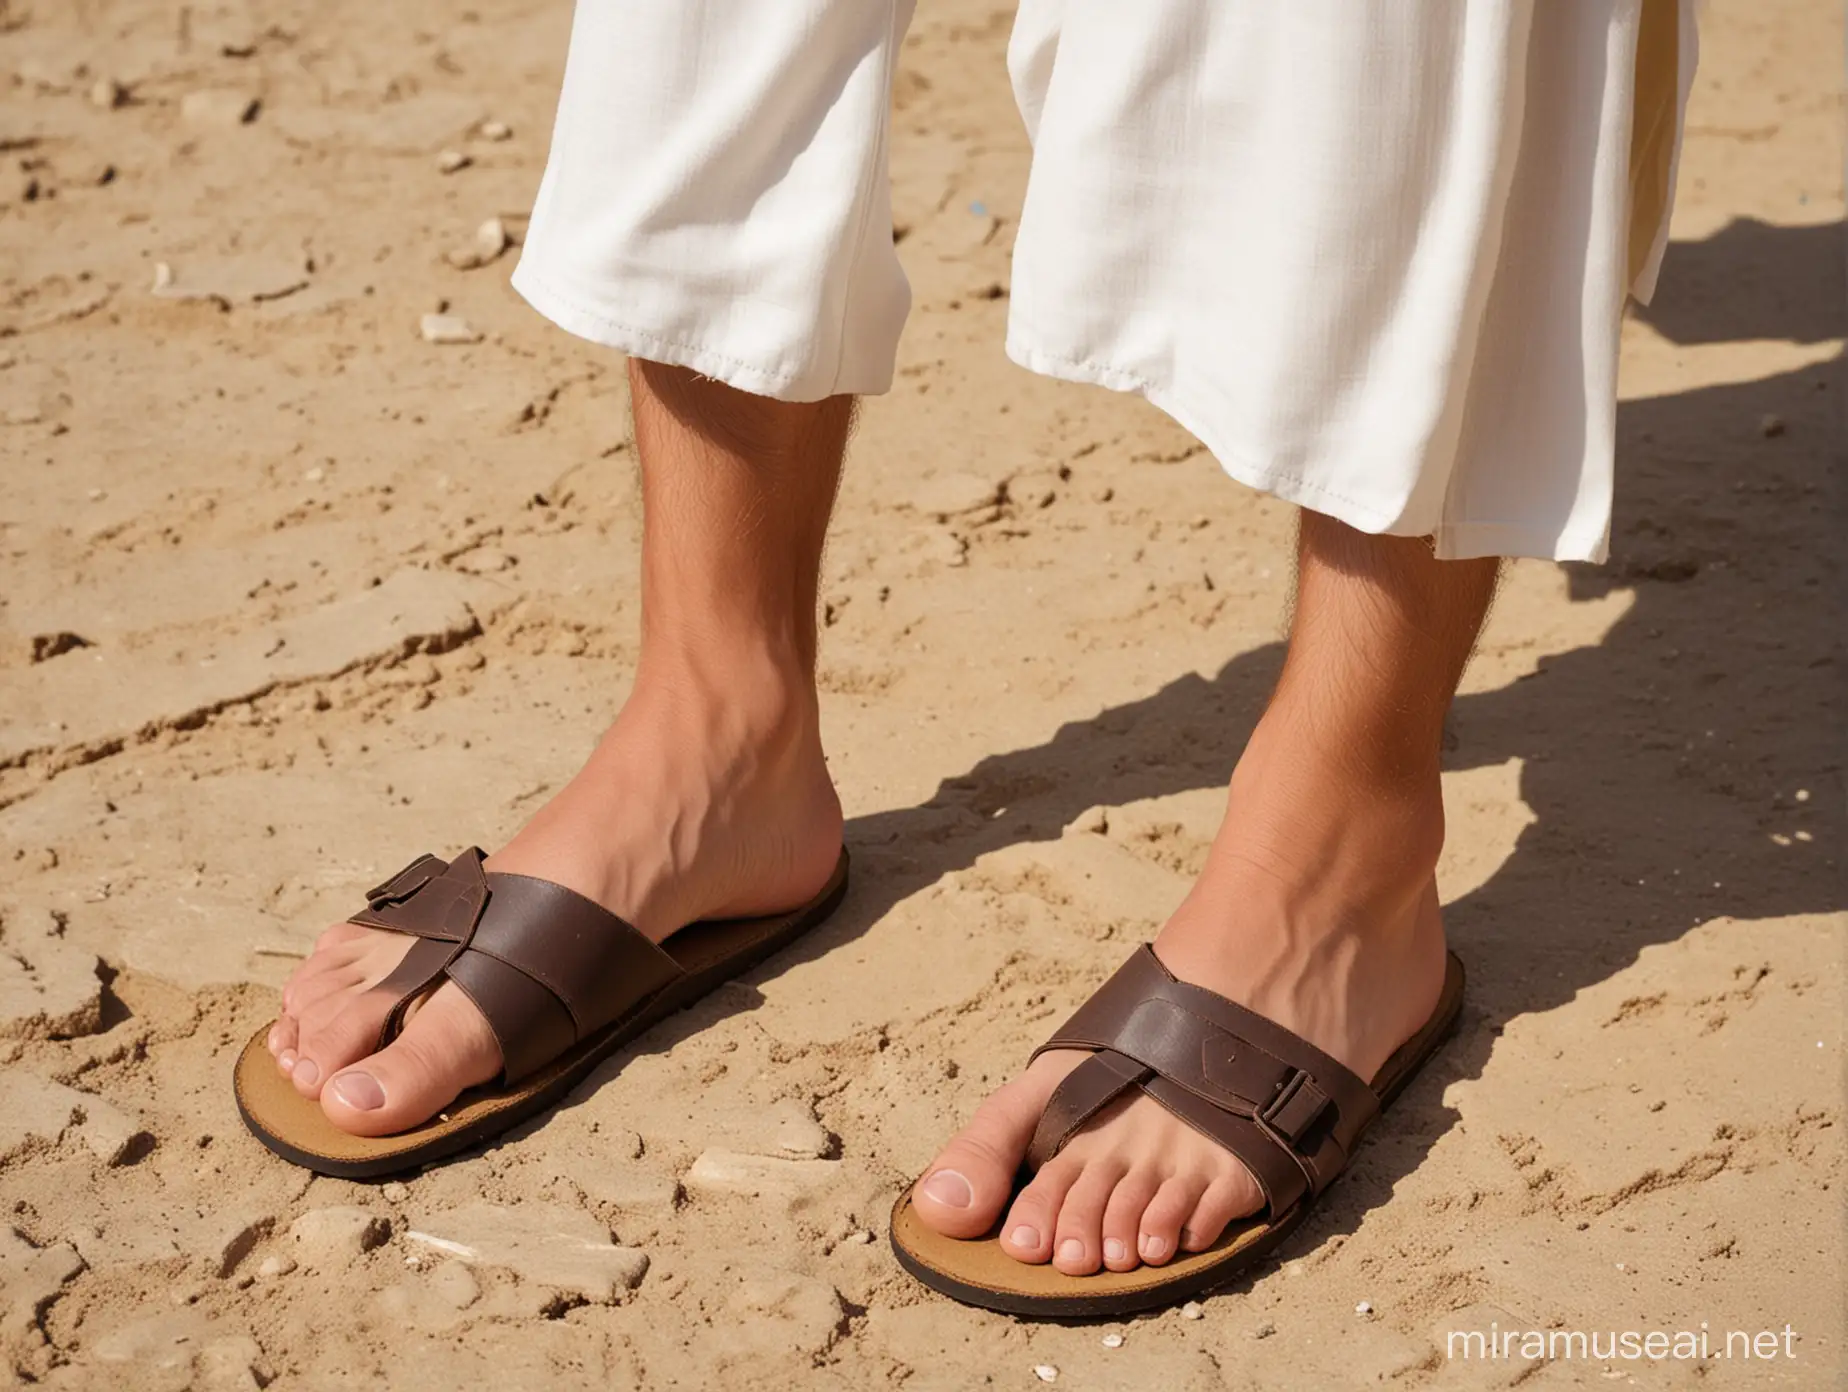 Jesus' sandals without feet or legs